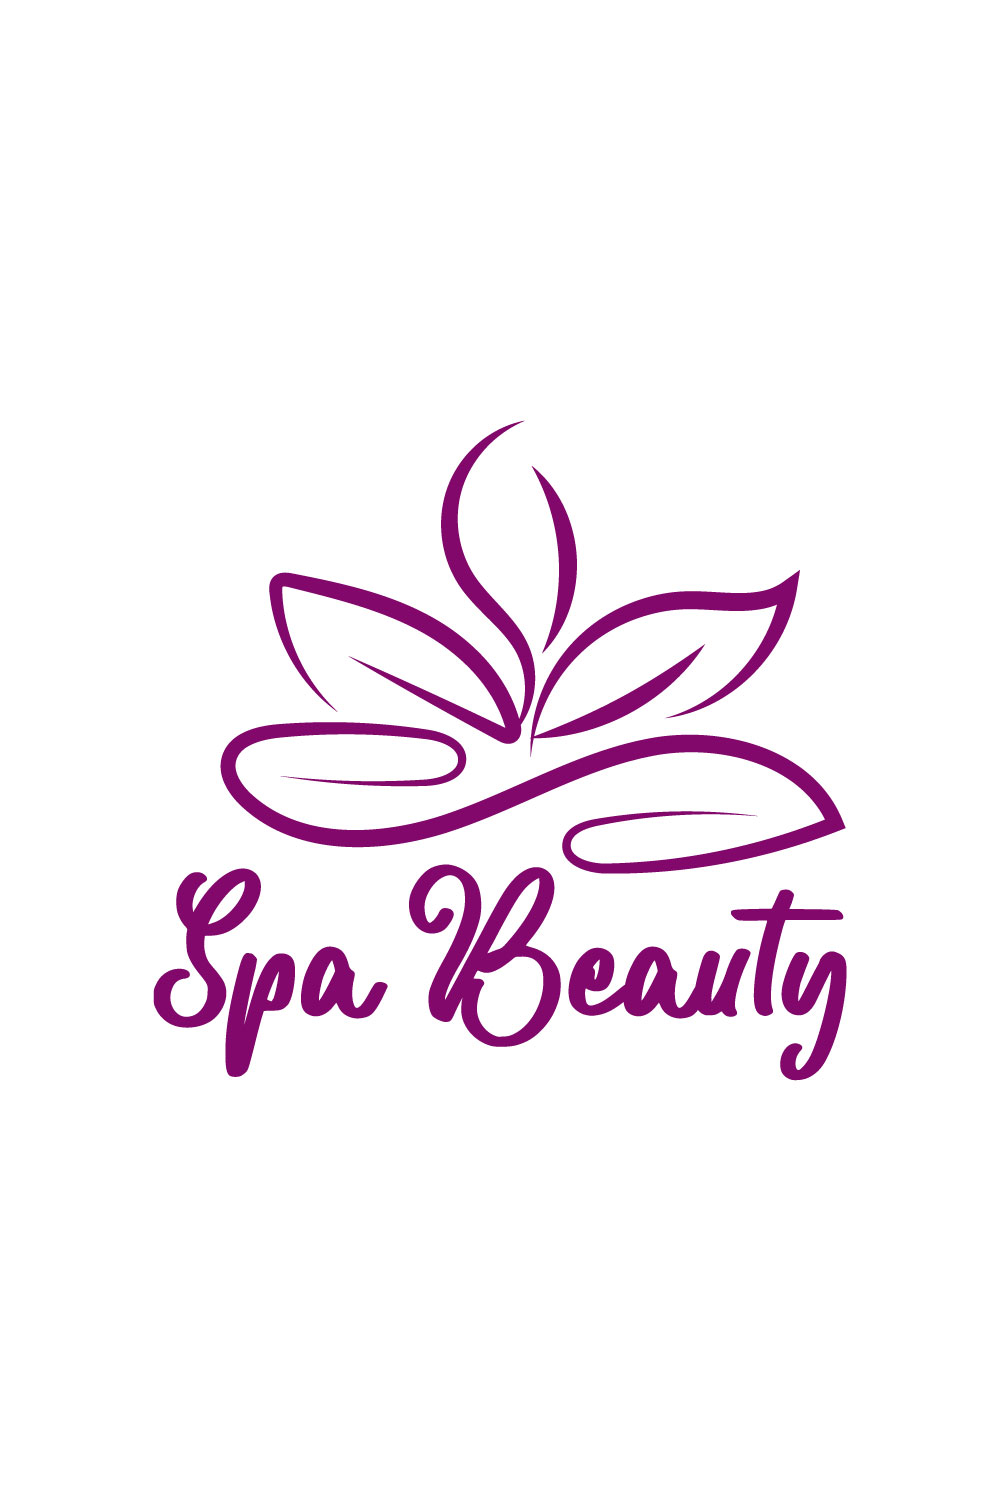 Free Spa Beauty care logo pinterest preview image.